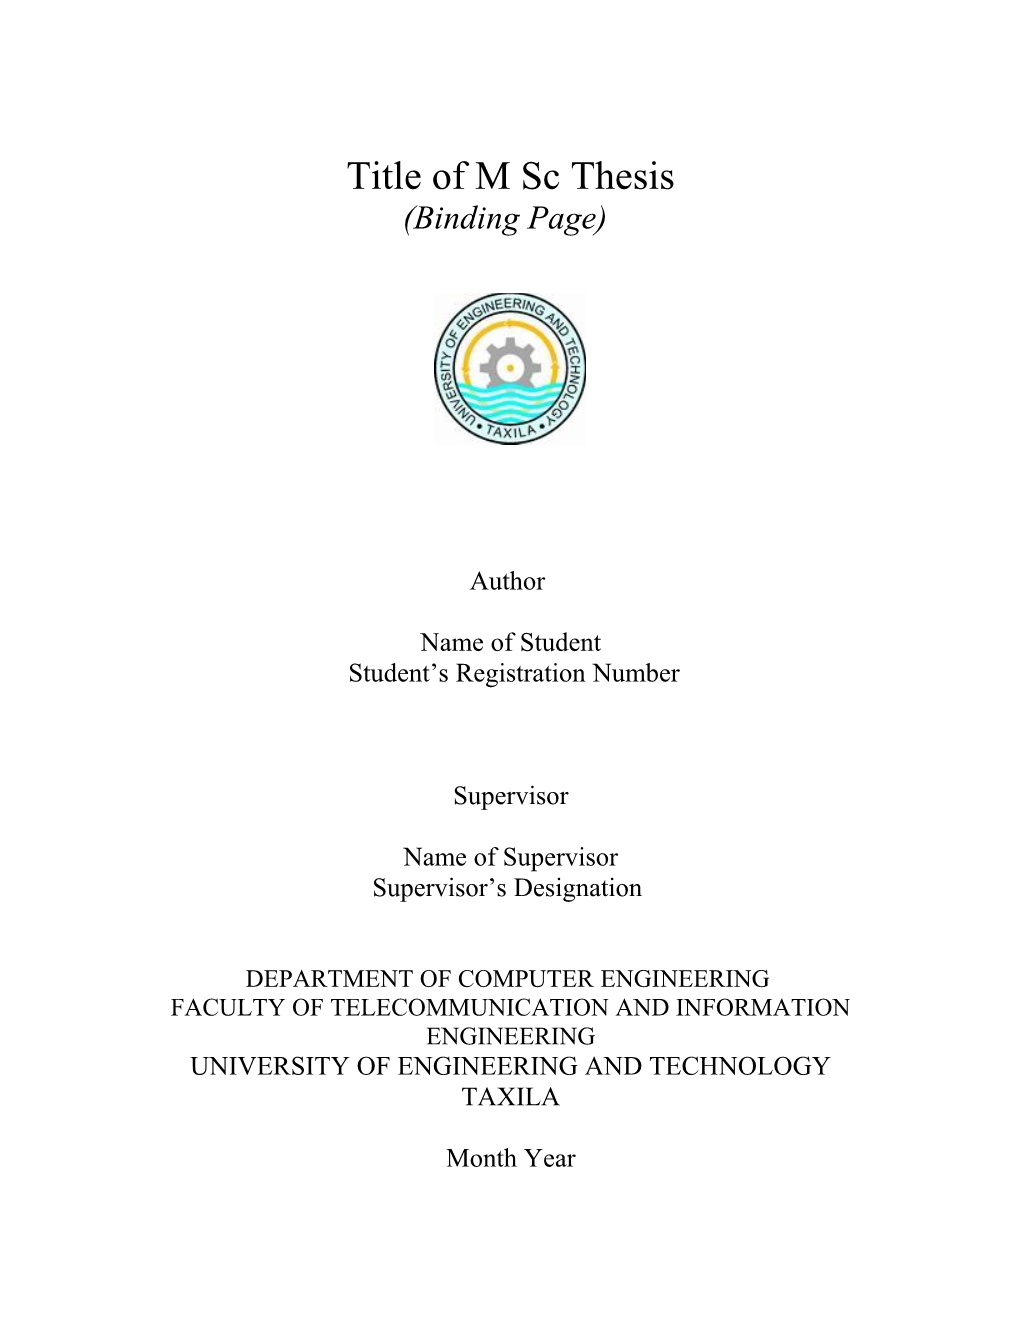 M.Sc. Thesis Template